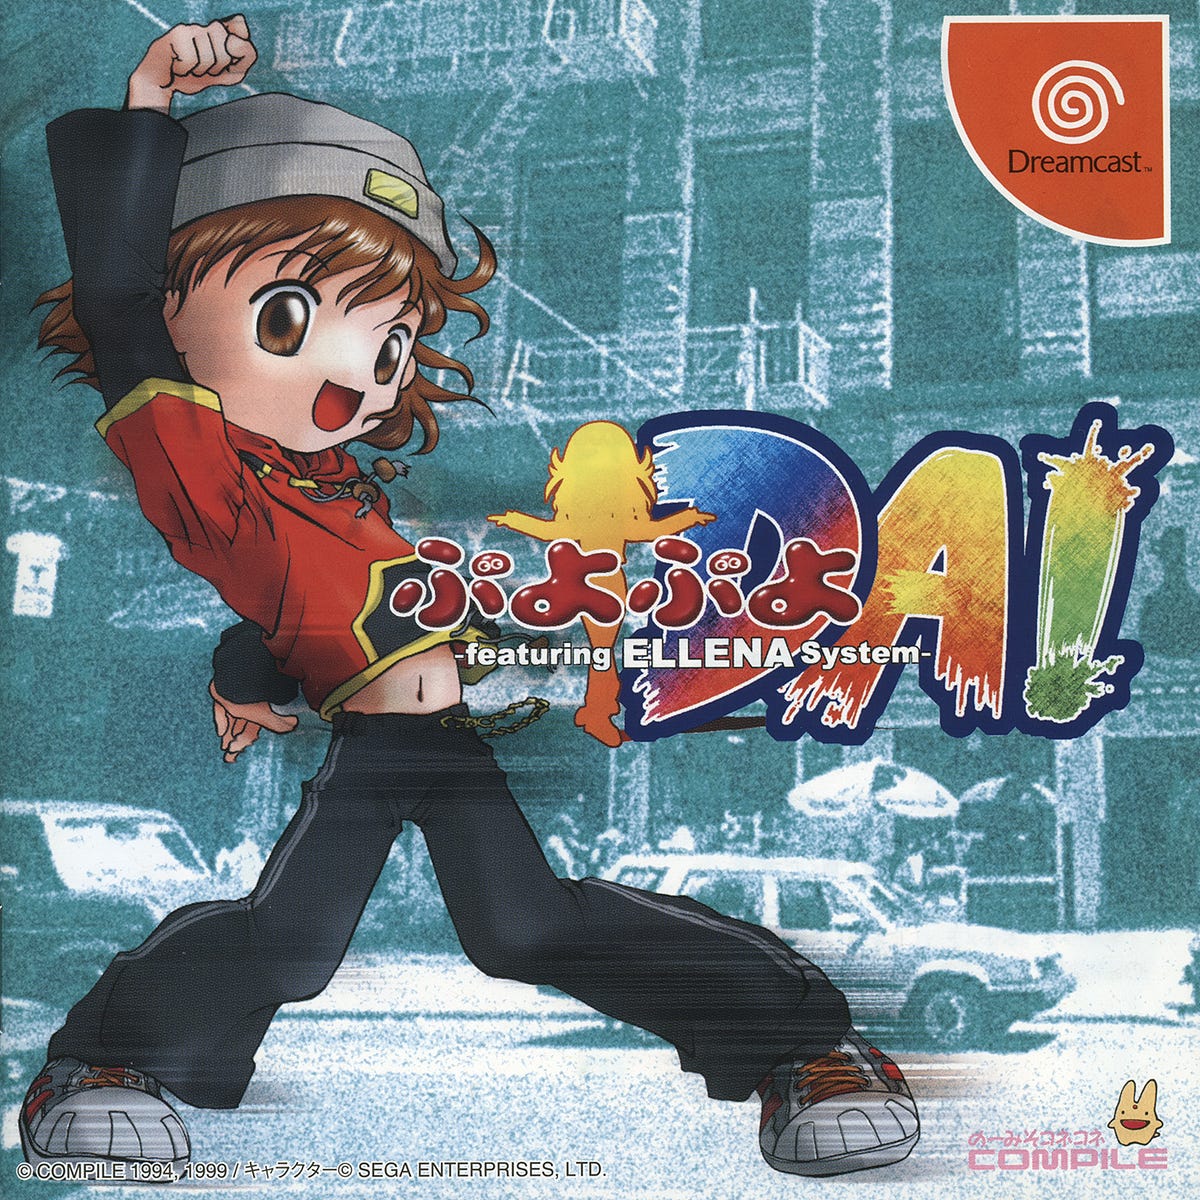 Dreamcast Game #02: Puyo Puyo DA! featuring Ellena System | by 